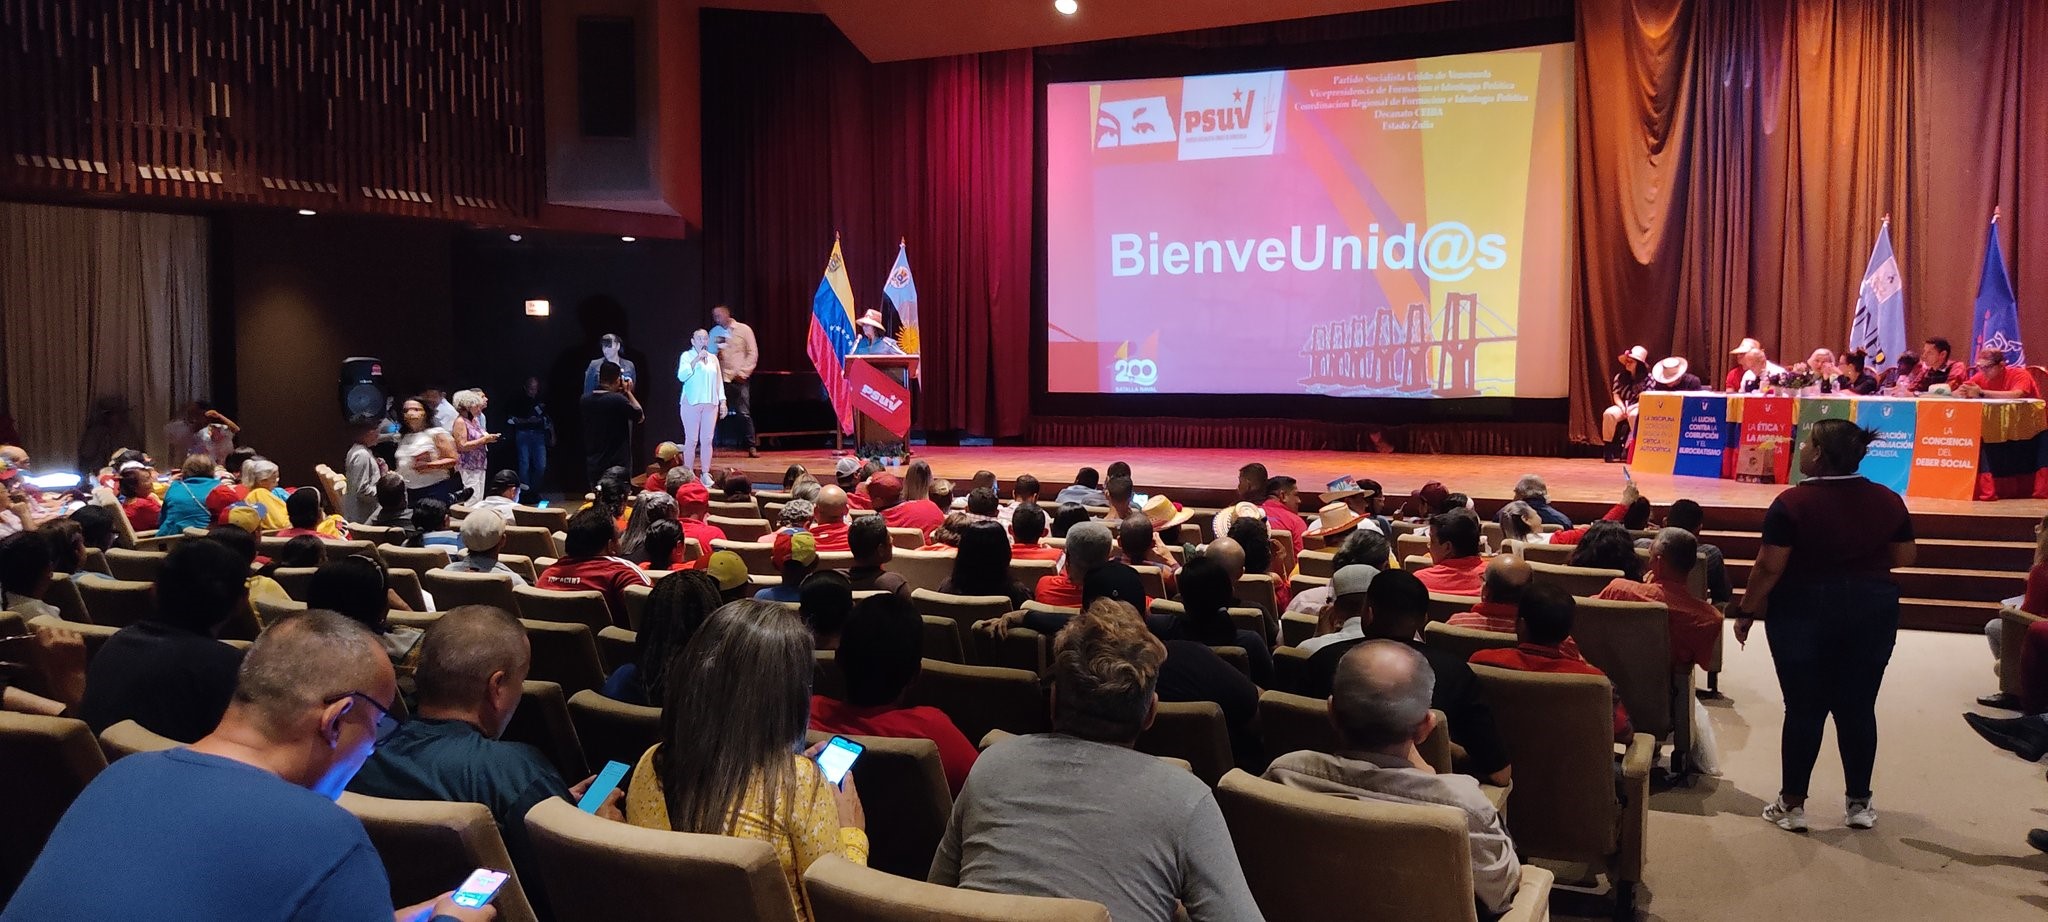 Tania Díaz: "The homeland demands the union of the people"